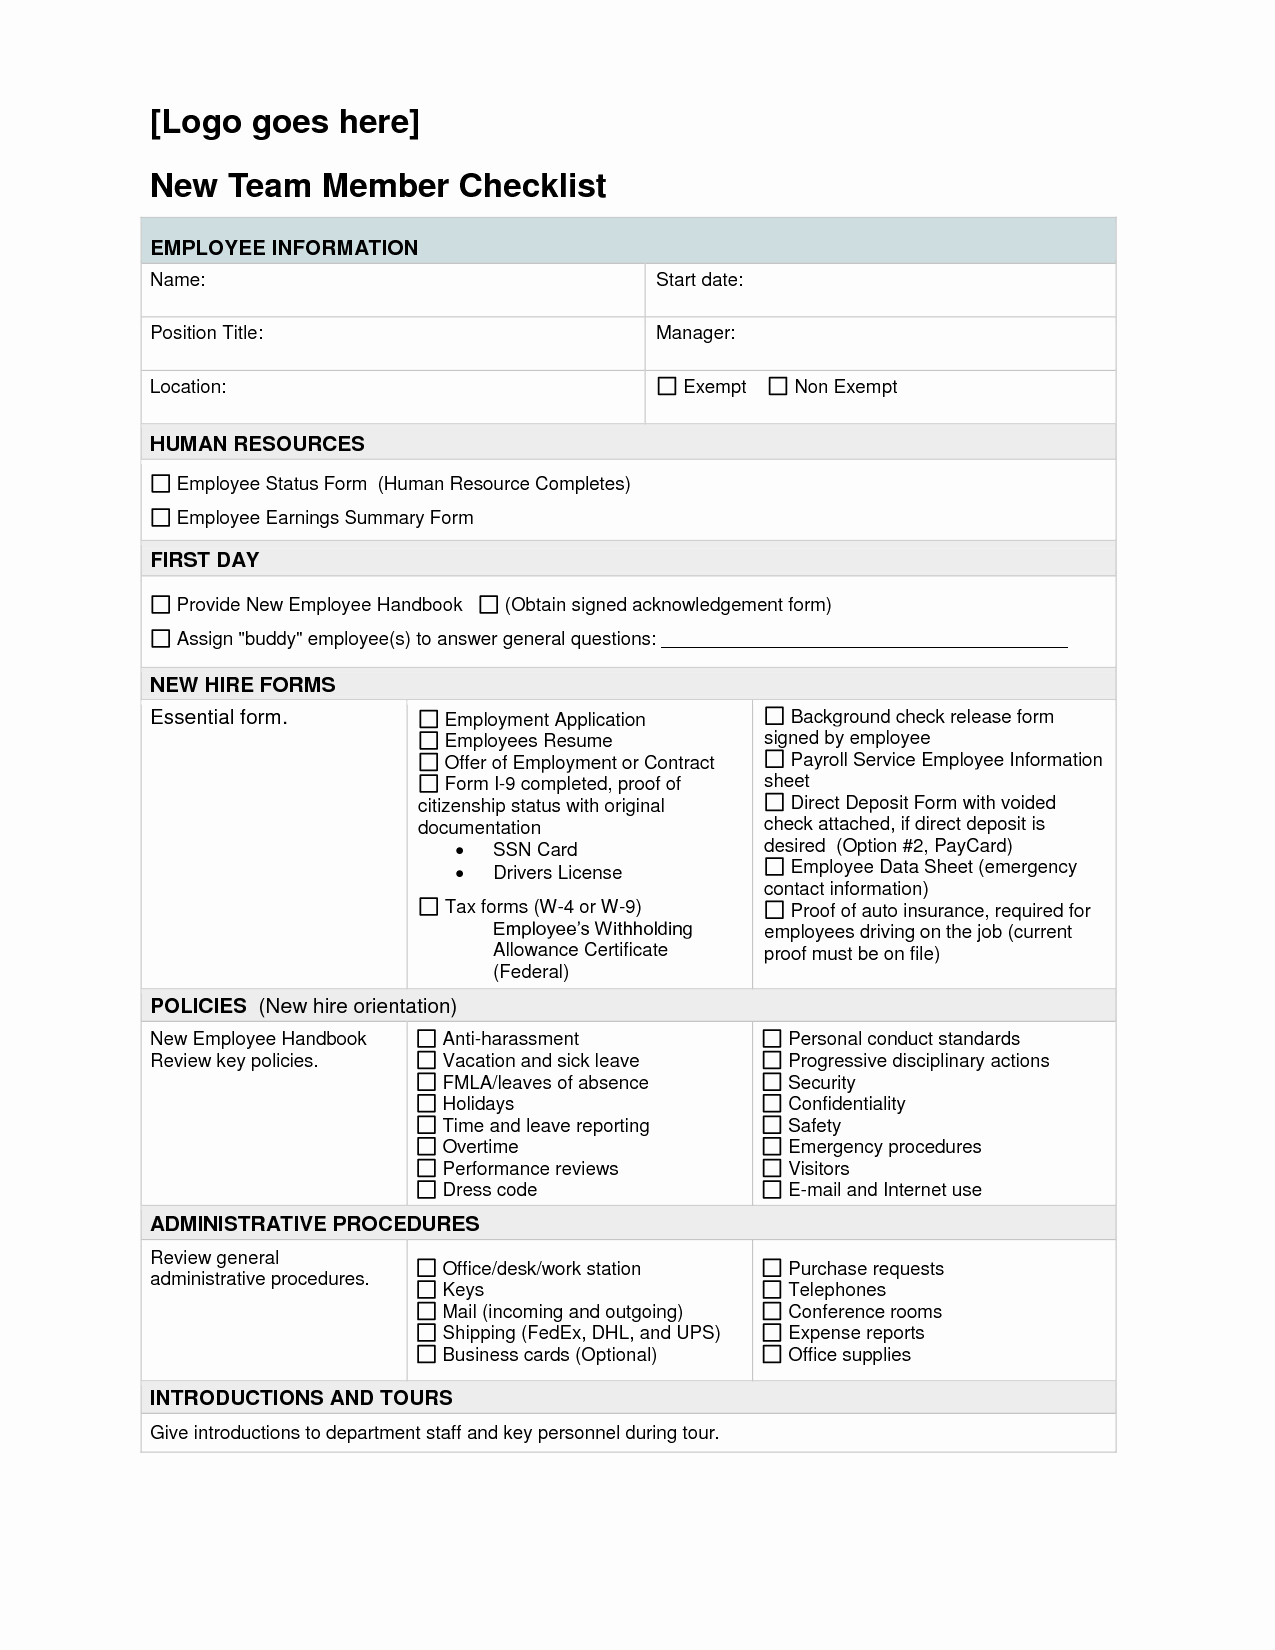 Free New Hire Checklist Template Best Of New Hire Checklist Full Version